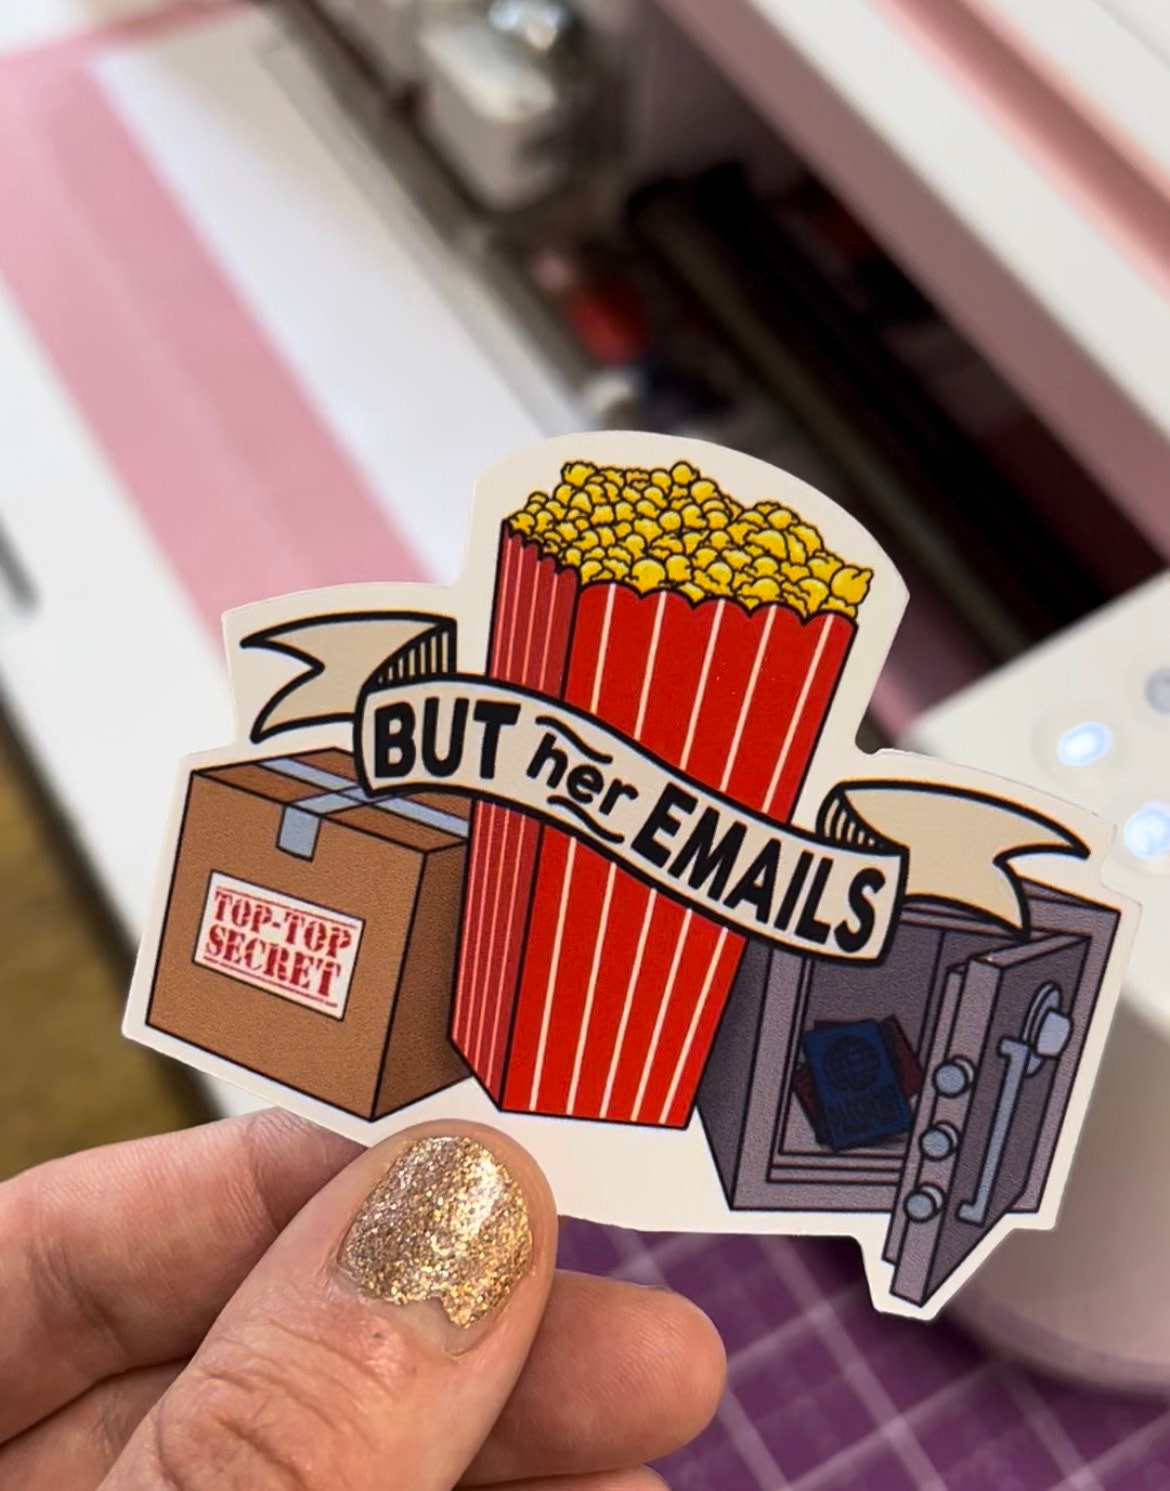 Popcorn Sticker - but her emails - trump for prison - and more options!